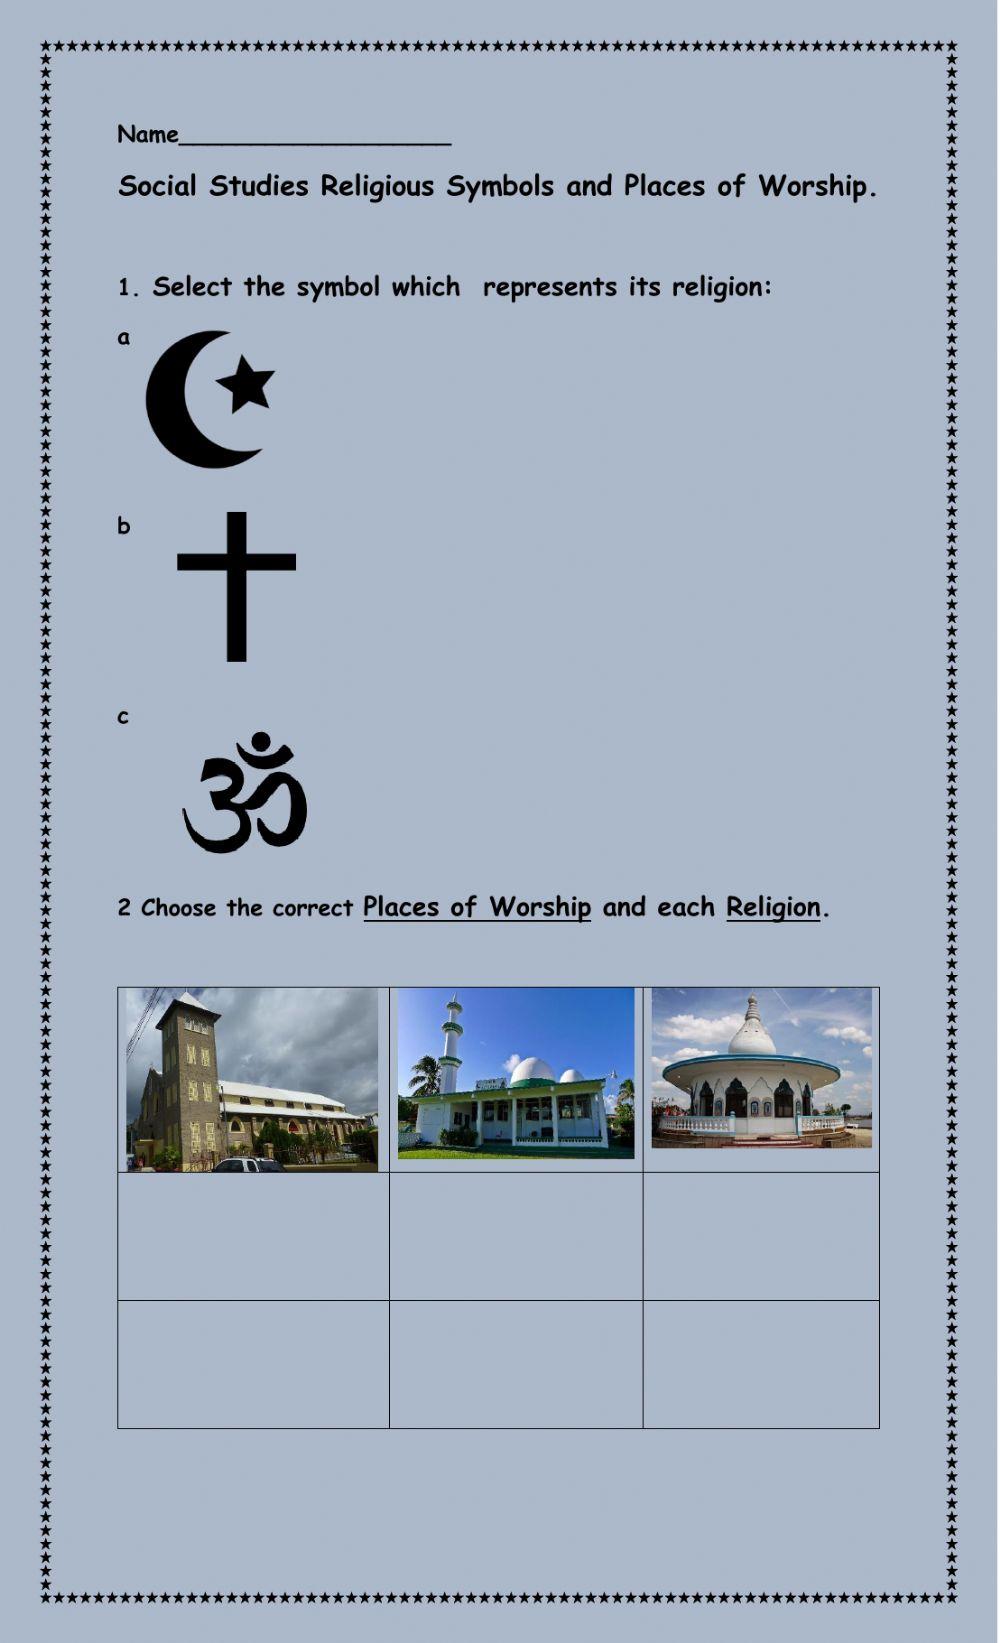 Religious Symbols and Places of Worship